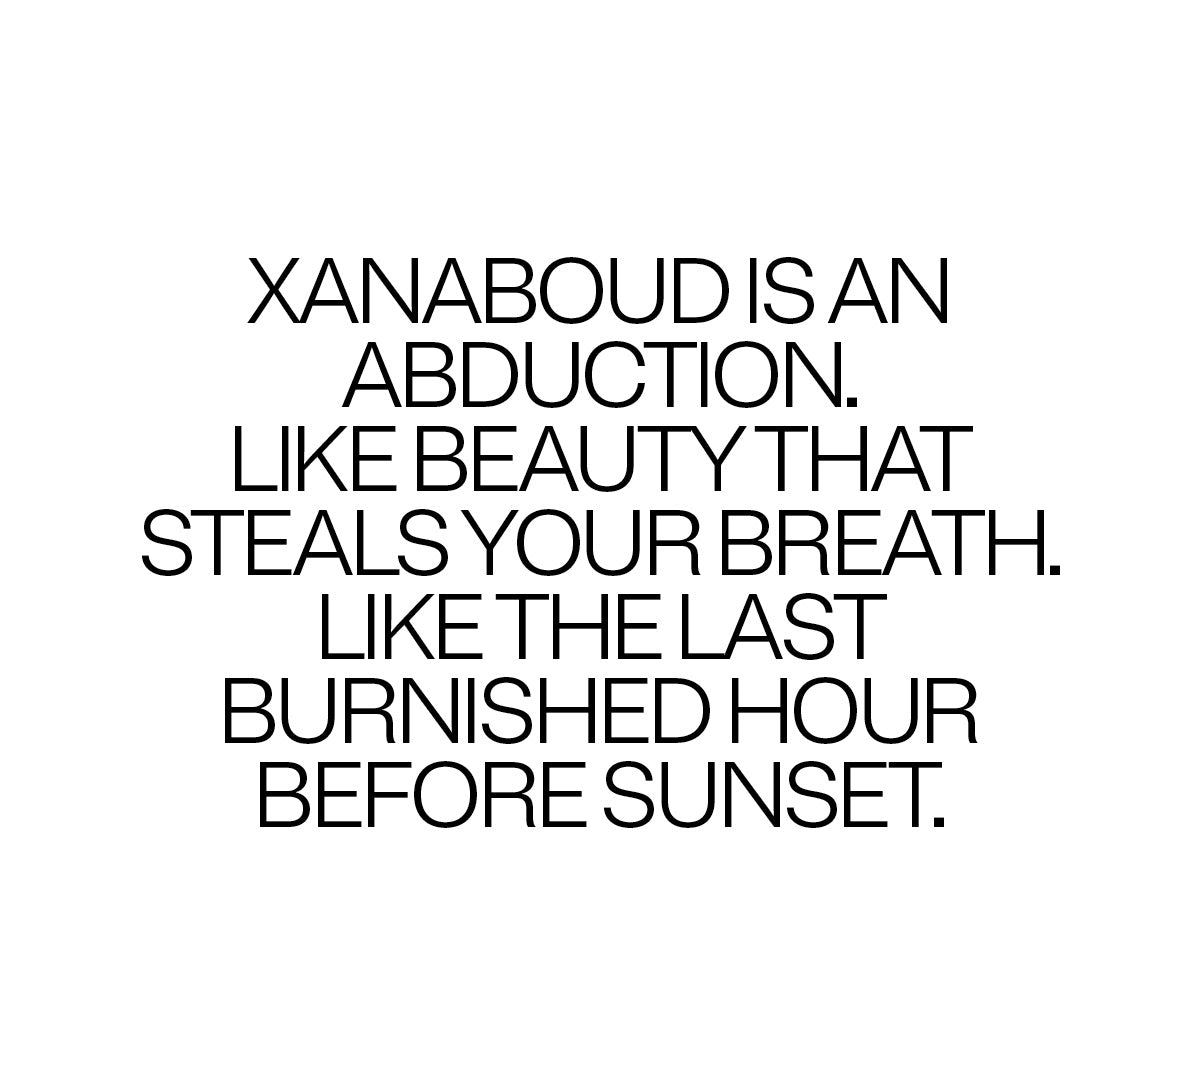 Xanaboud is an abduction. Like the last burnished hour before sunset. 